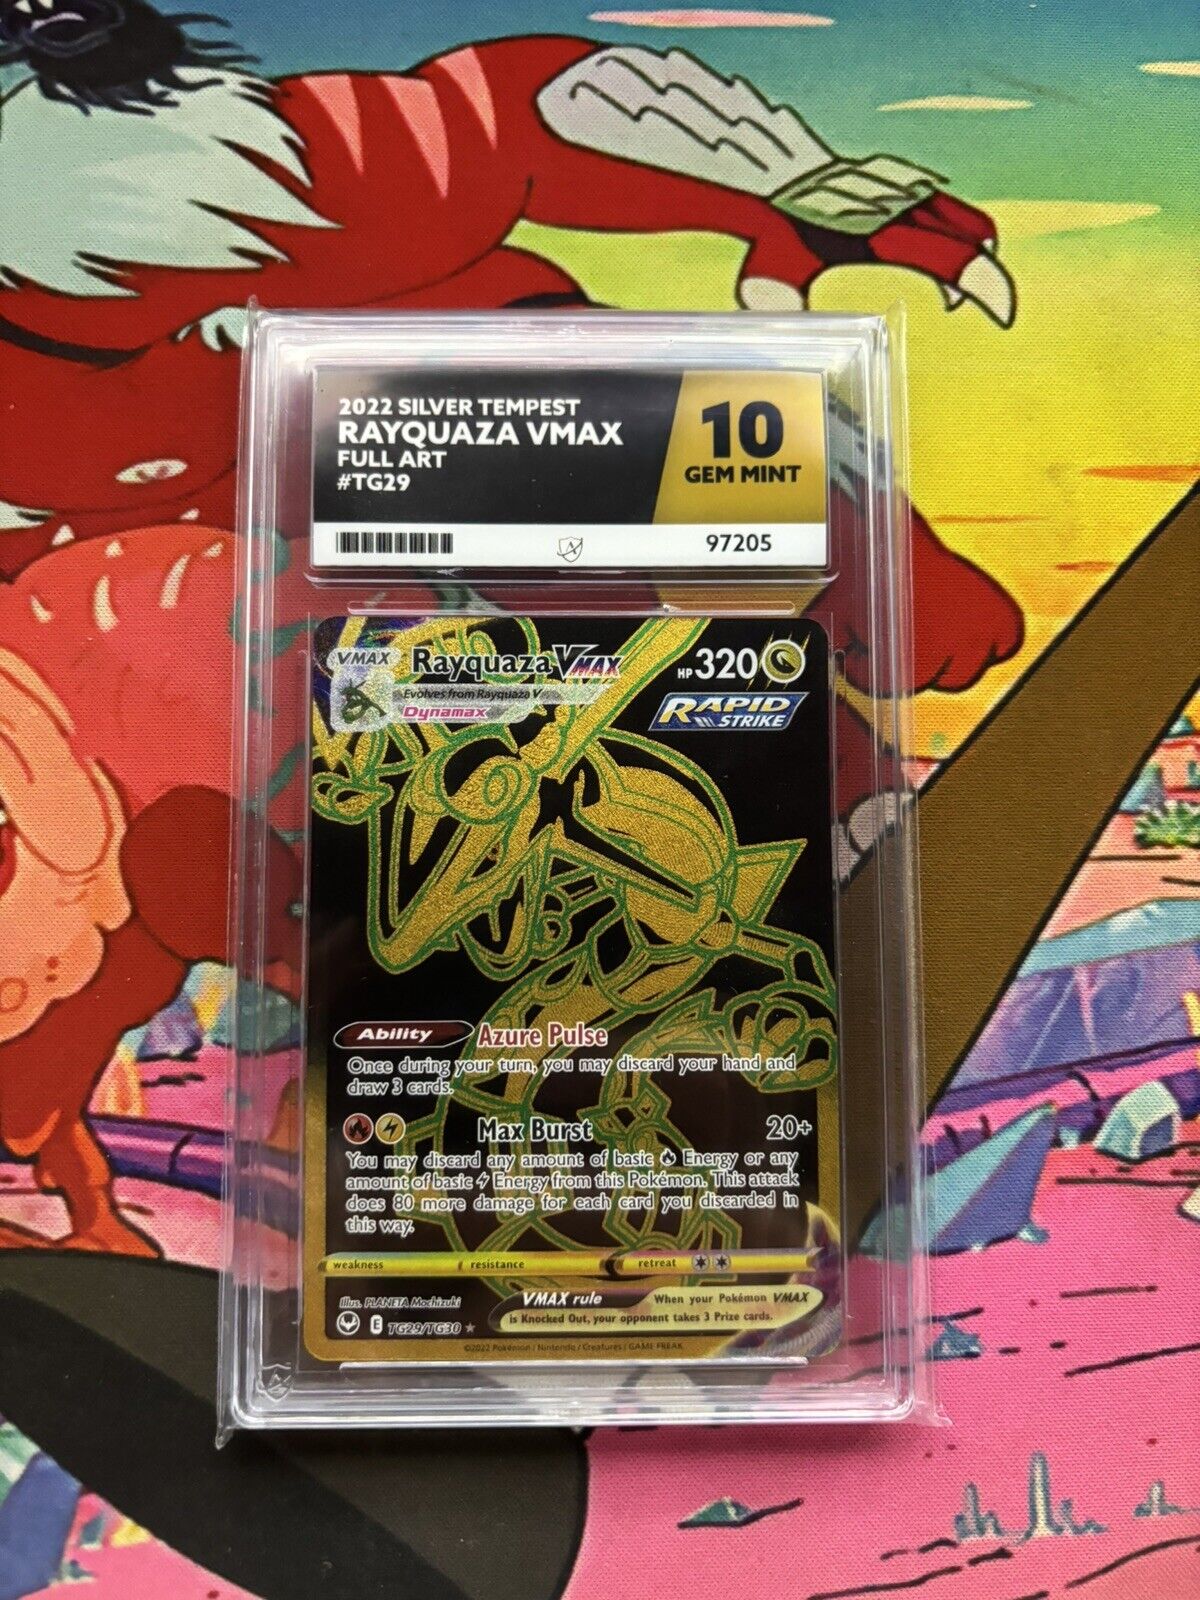 2022 SILVER TEMPEST RAYQUAZA VMAX FULL ART #TG29 ACE 10 